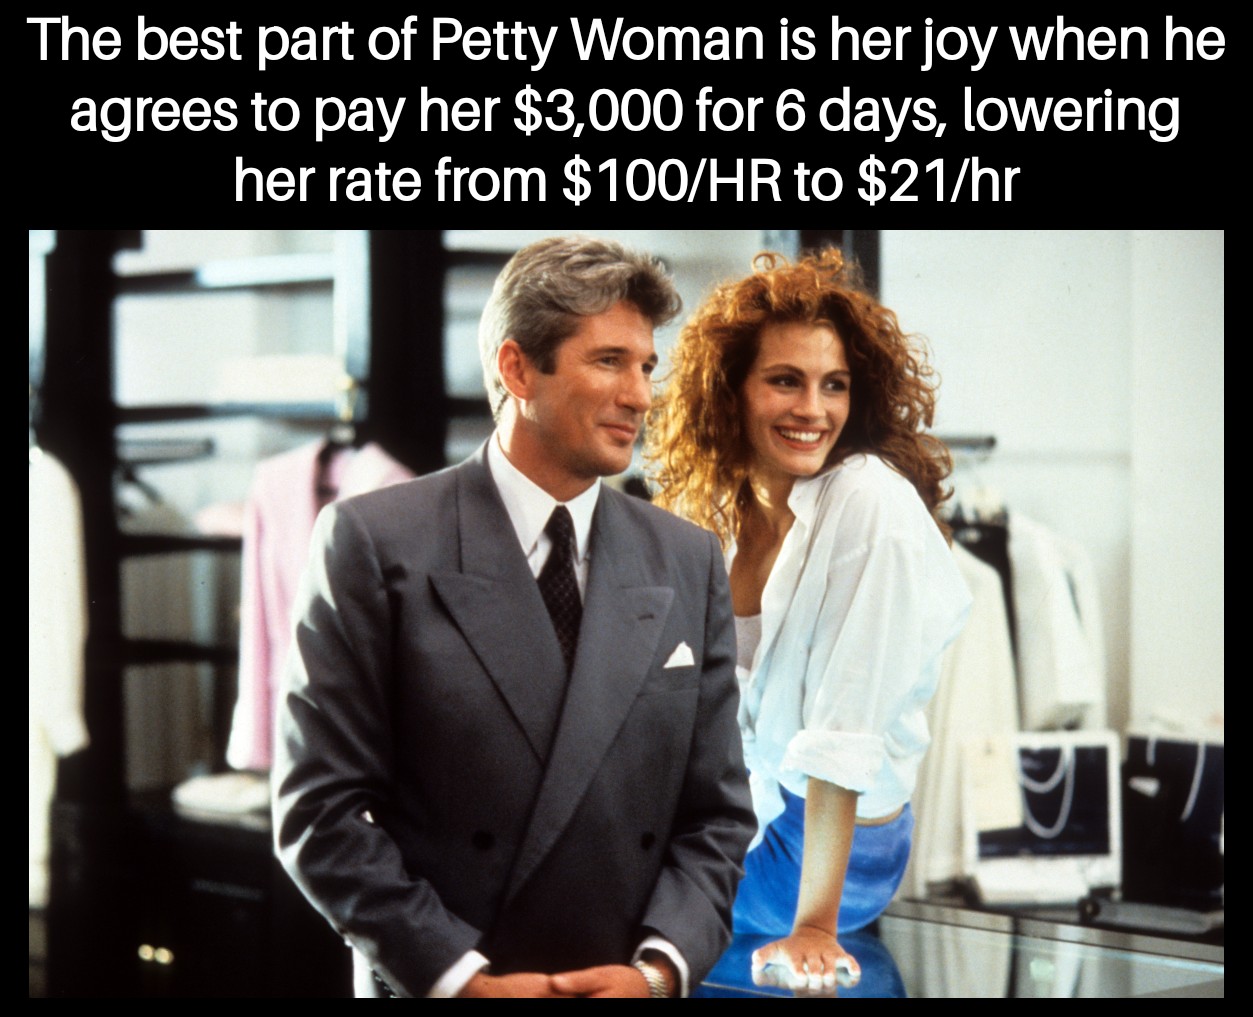 monday morning randomness - richard gere pretty woman - The best part of Petty Woman is her joy when he agrees to pay her $3,000 for 6 days, lowering her rate from $100Hr to $21hr 17